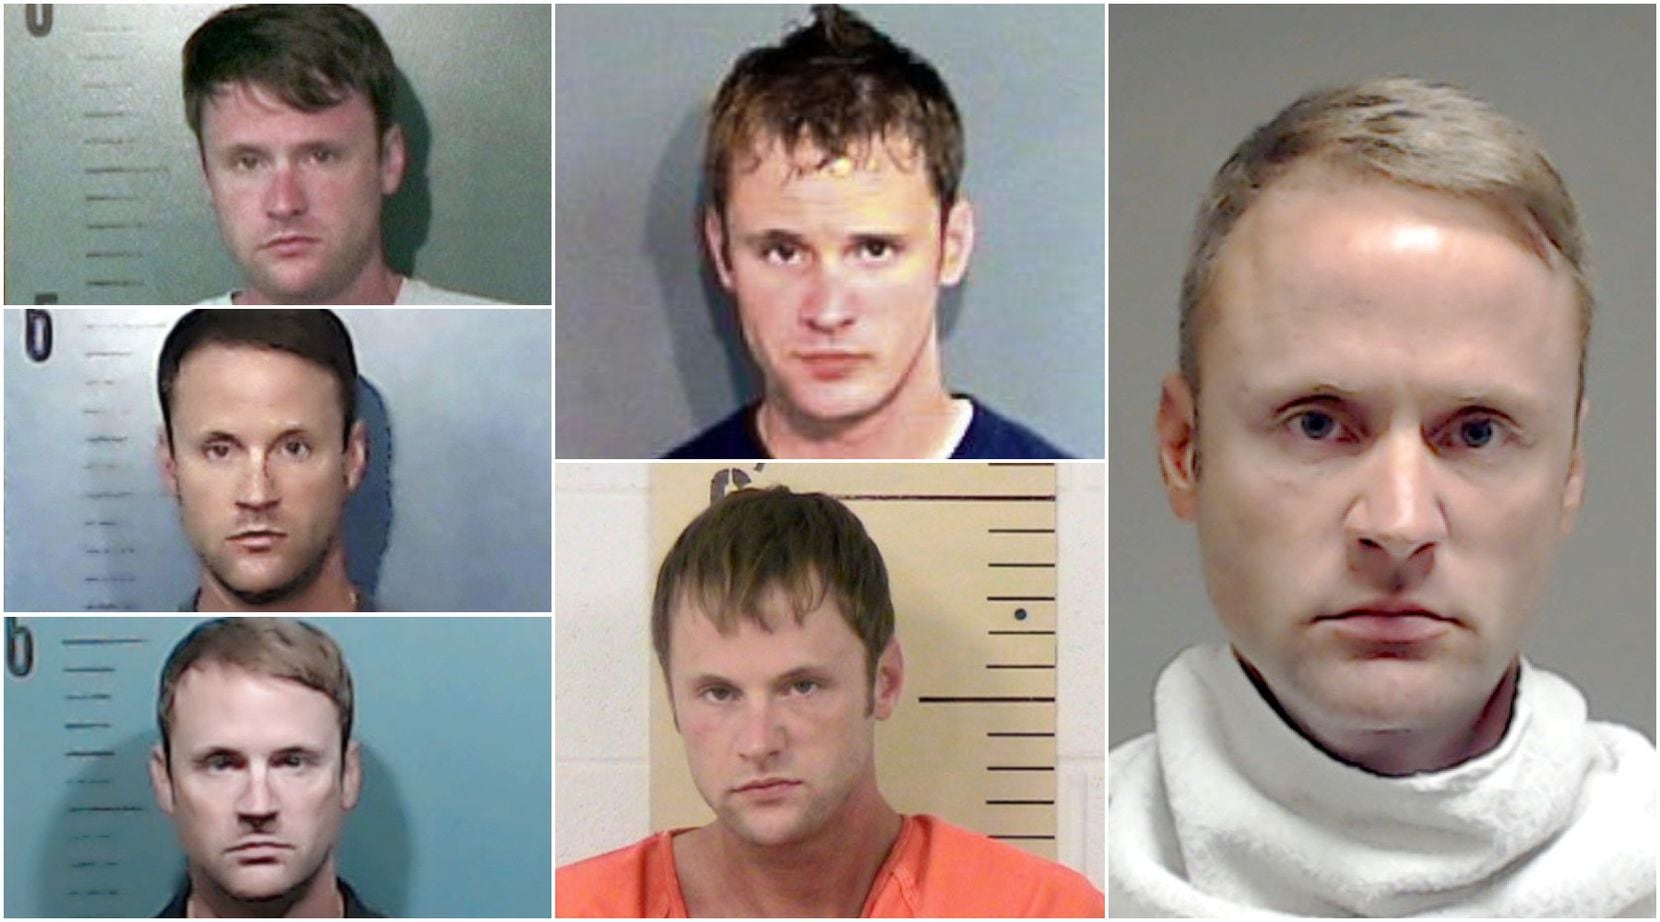 These are some of the jail booking mugs for John Wright Martin, who has been arrested...